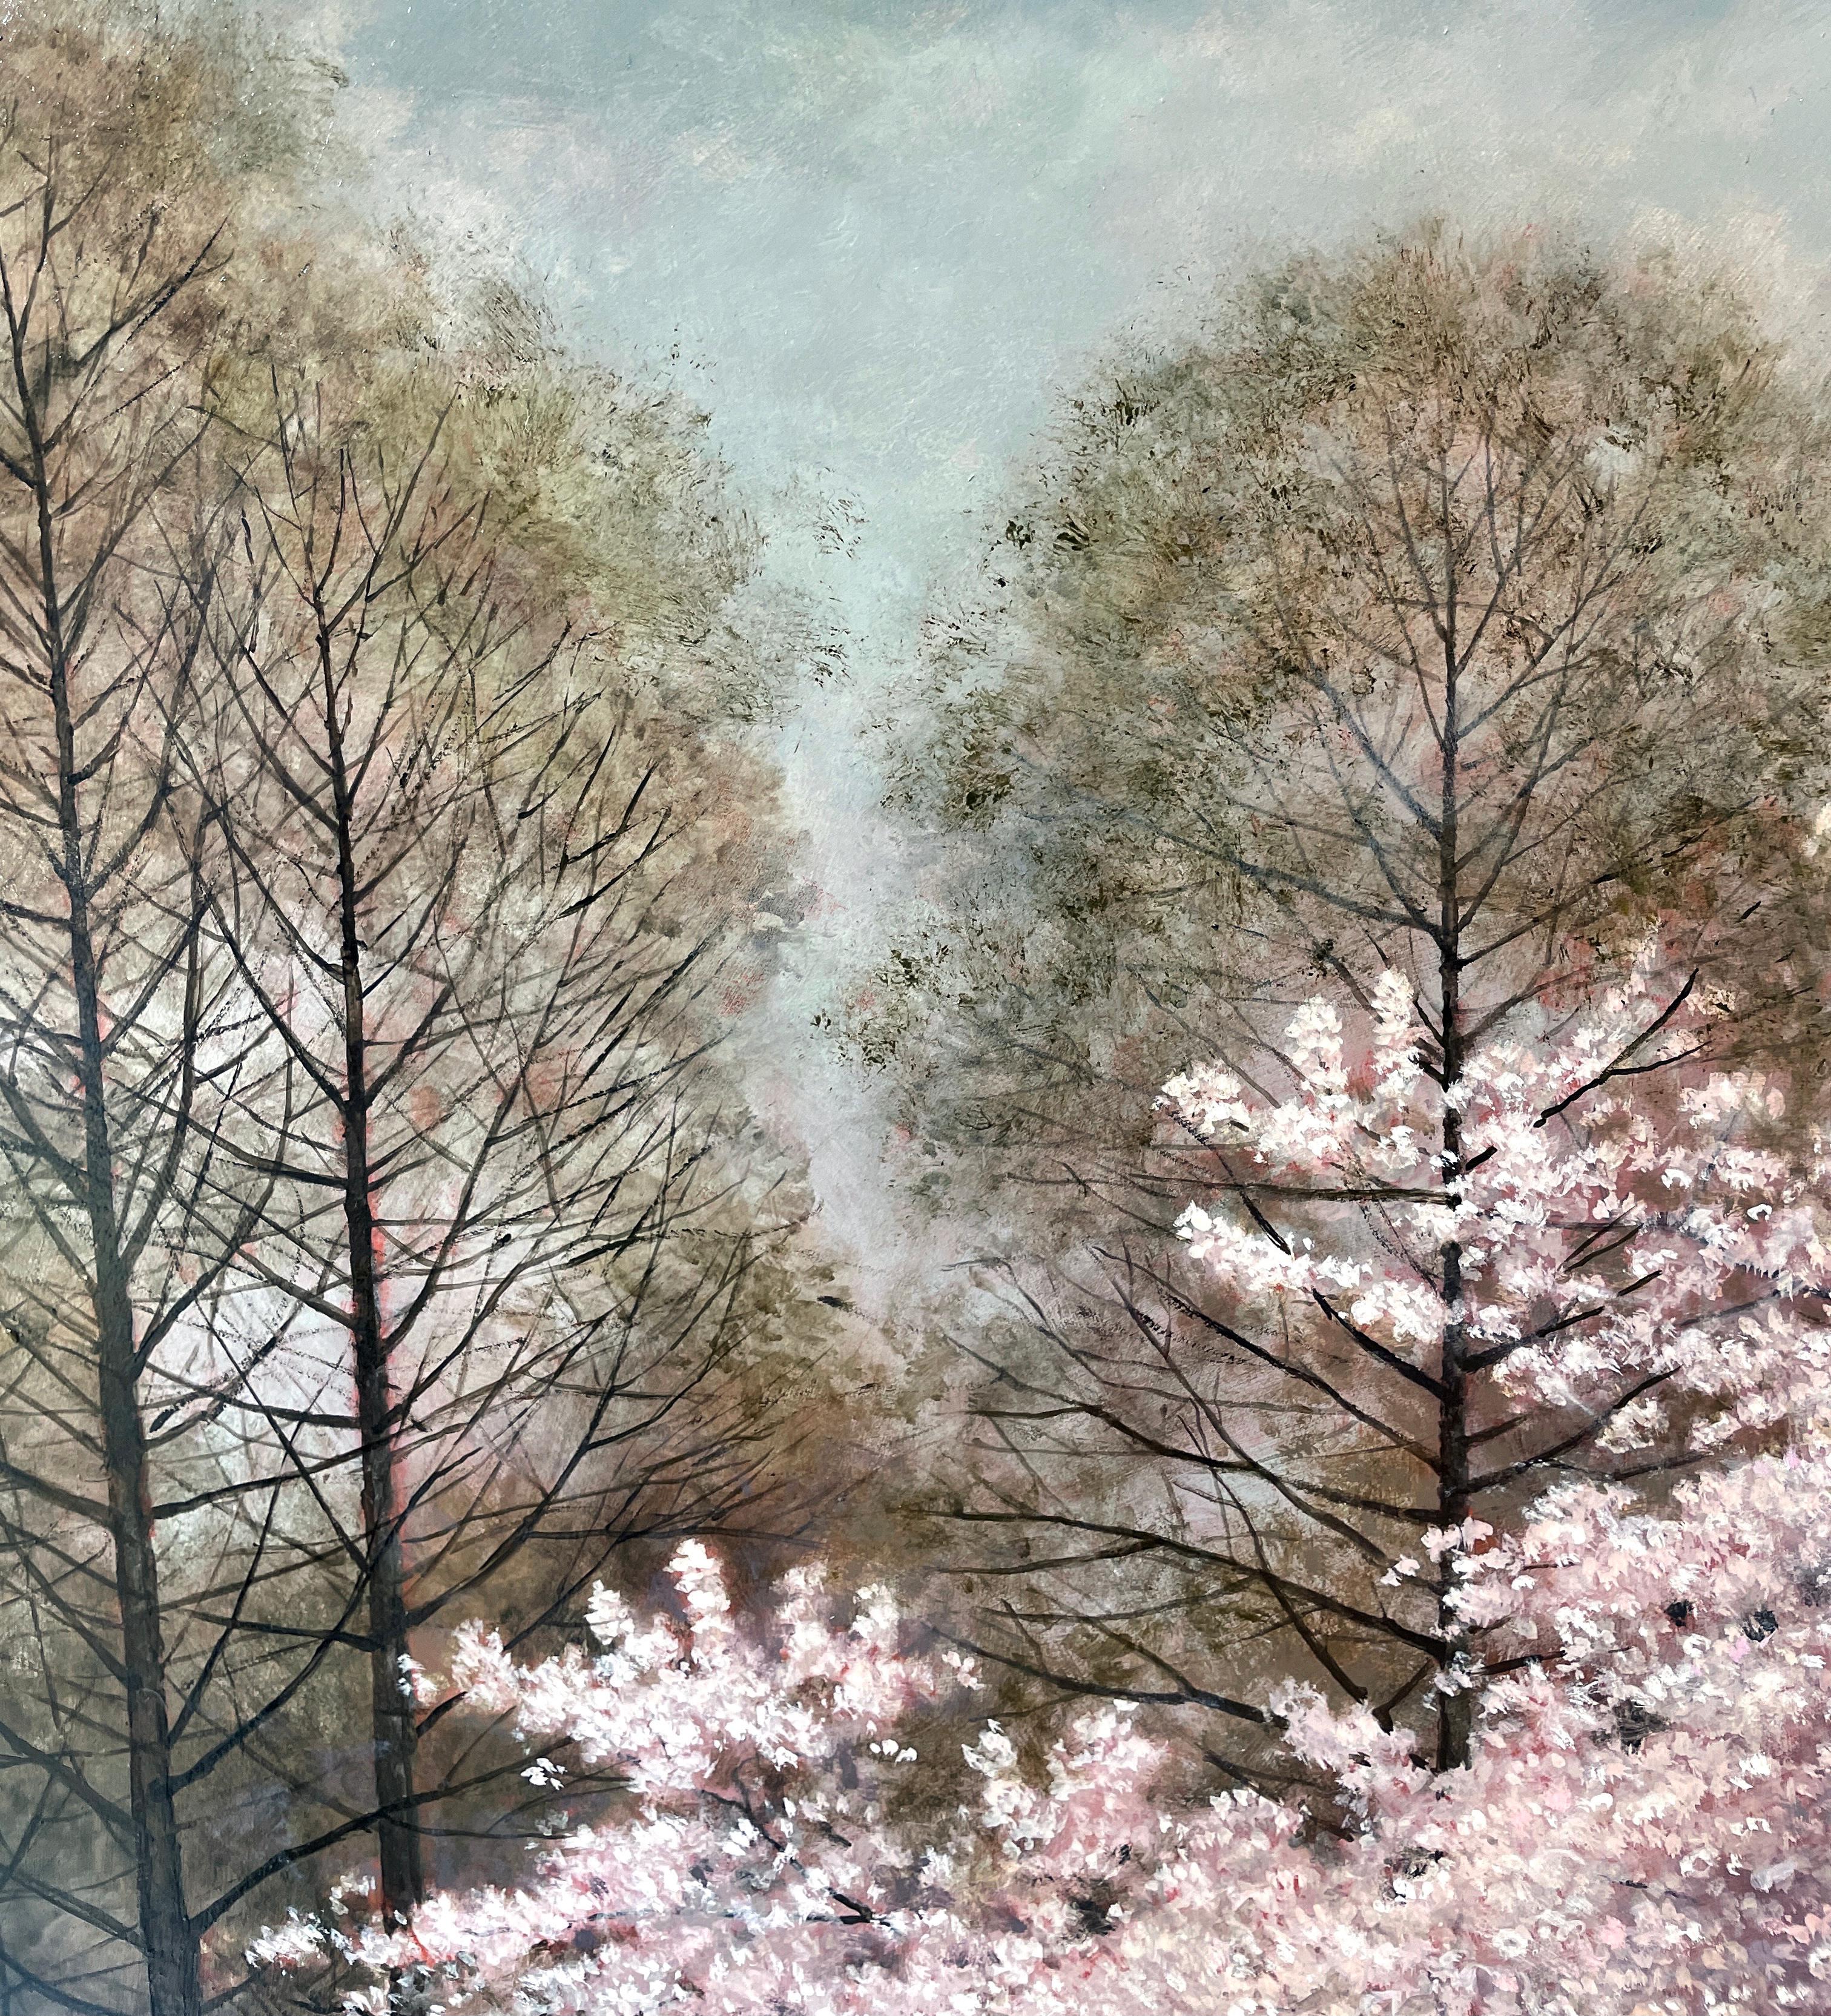 This contemplative oil painting by Jeff Aeling captures spring in all its glory.  The crabapple tree is in full bloom with its tiny pale pink flowers bringing the dormant winter woods into the rebirth of spring.  Painted in a style that blends